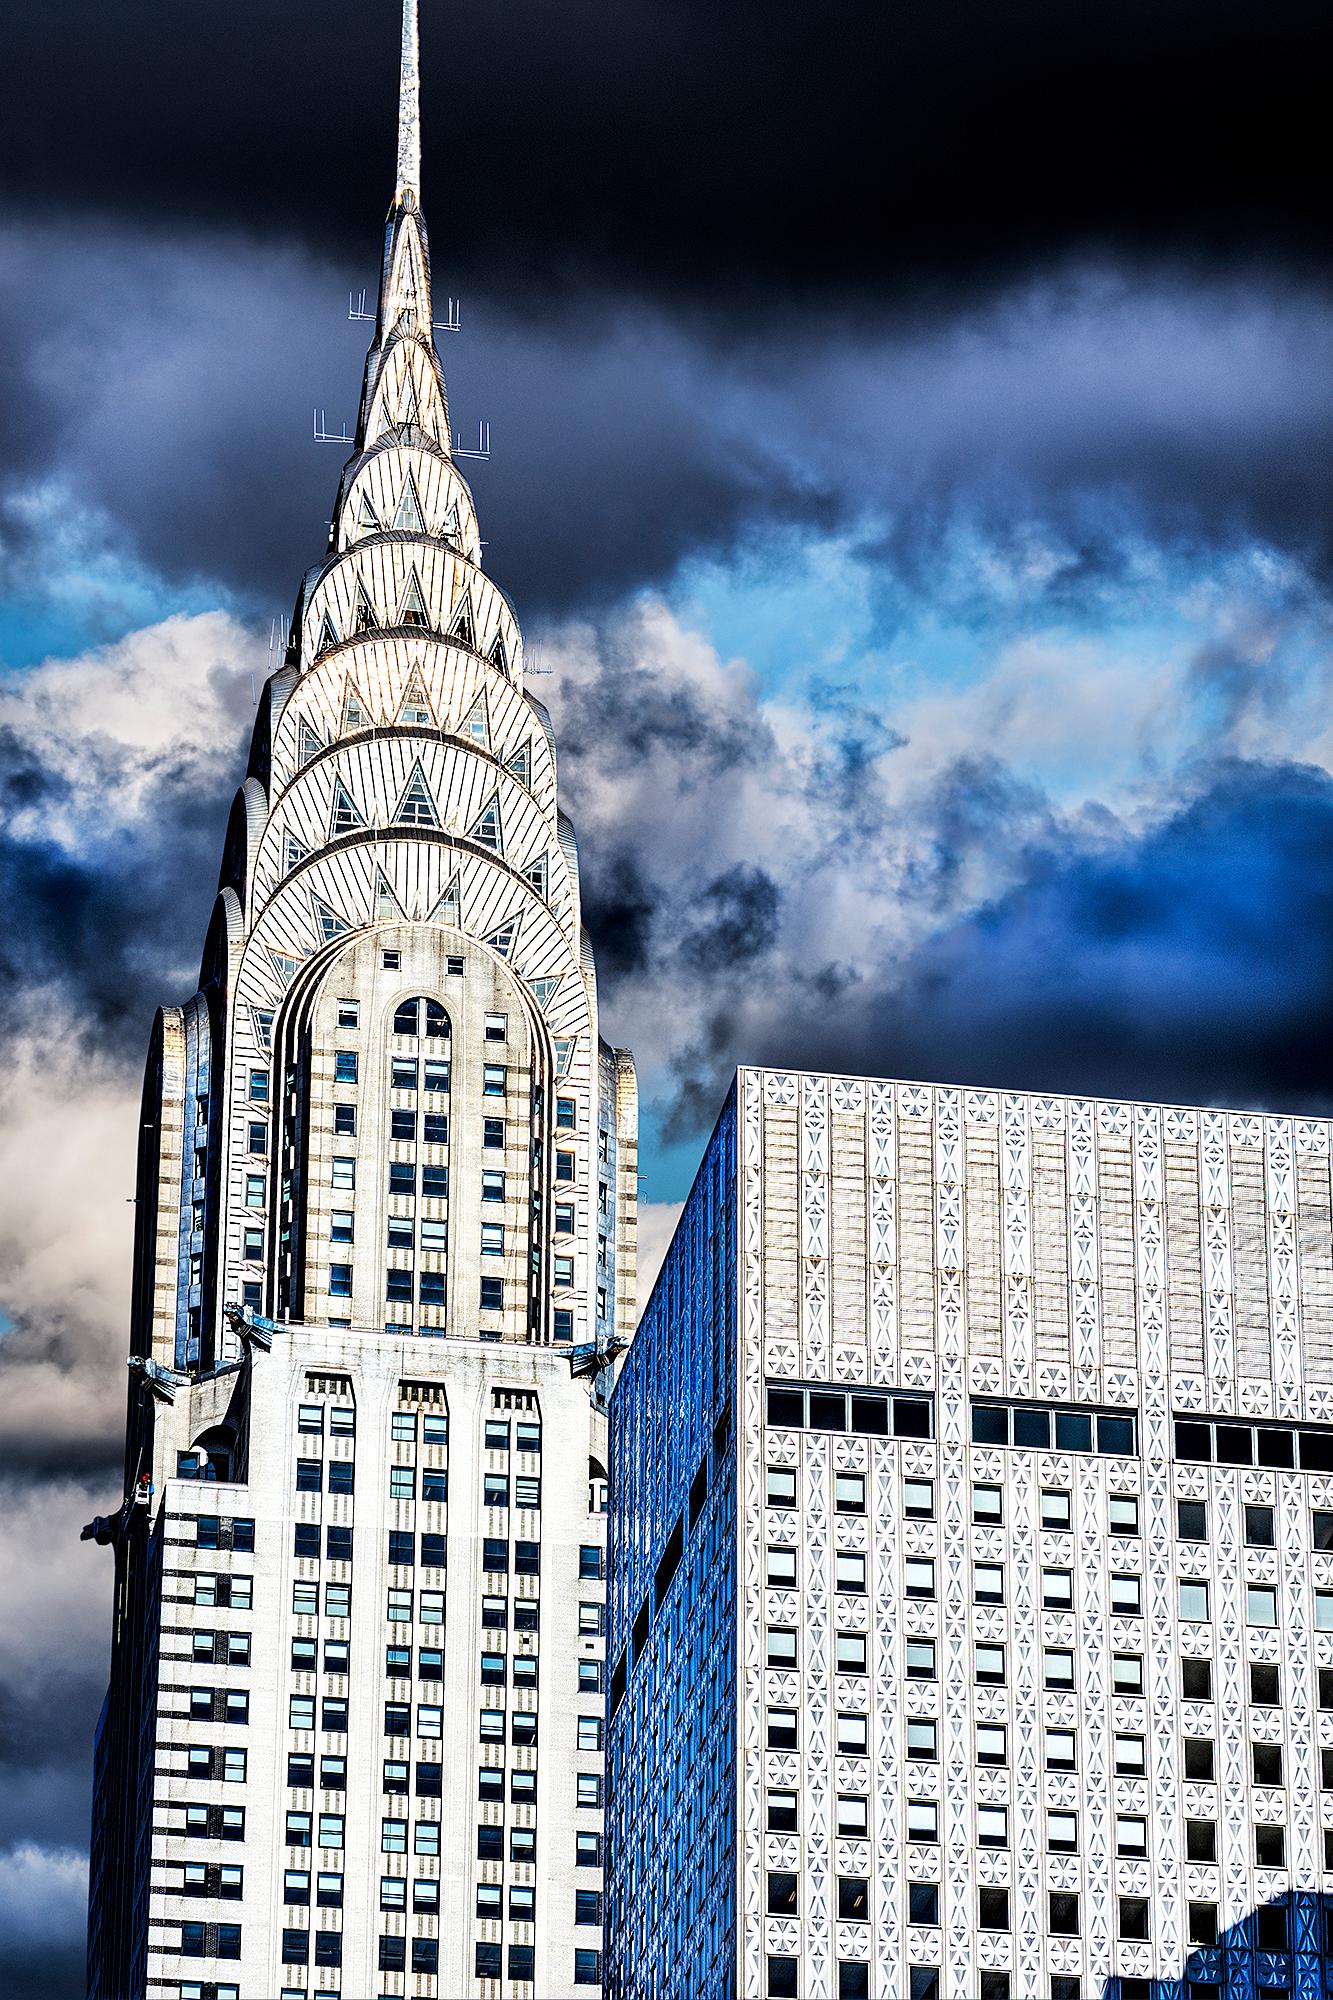 Top Of Chrysler Building Against Dramatic Clouds